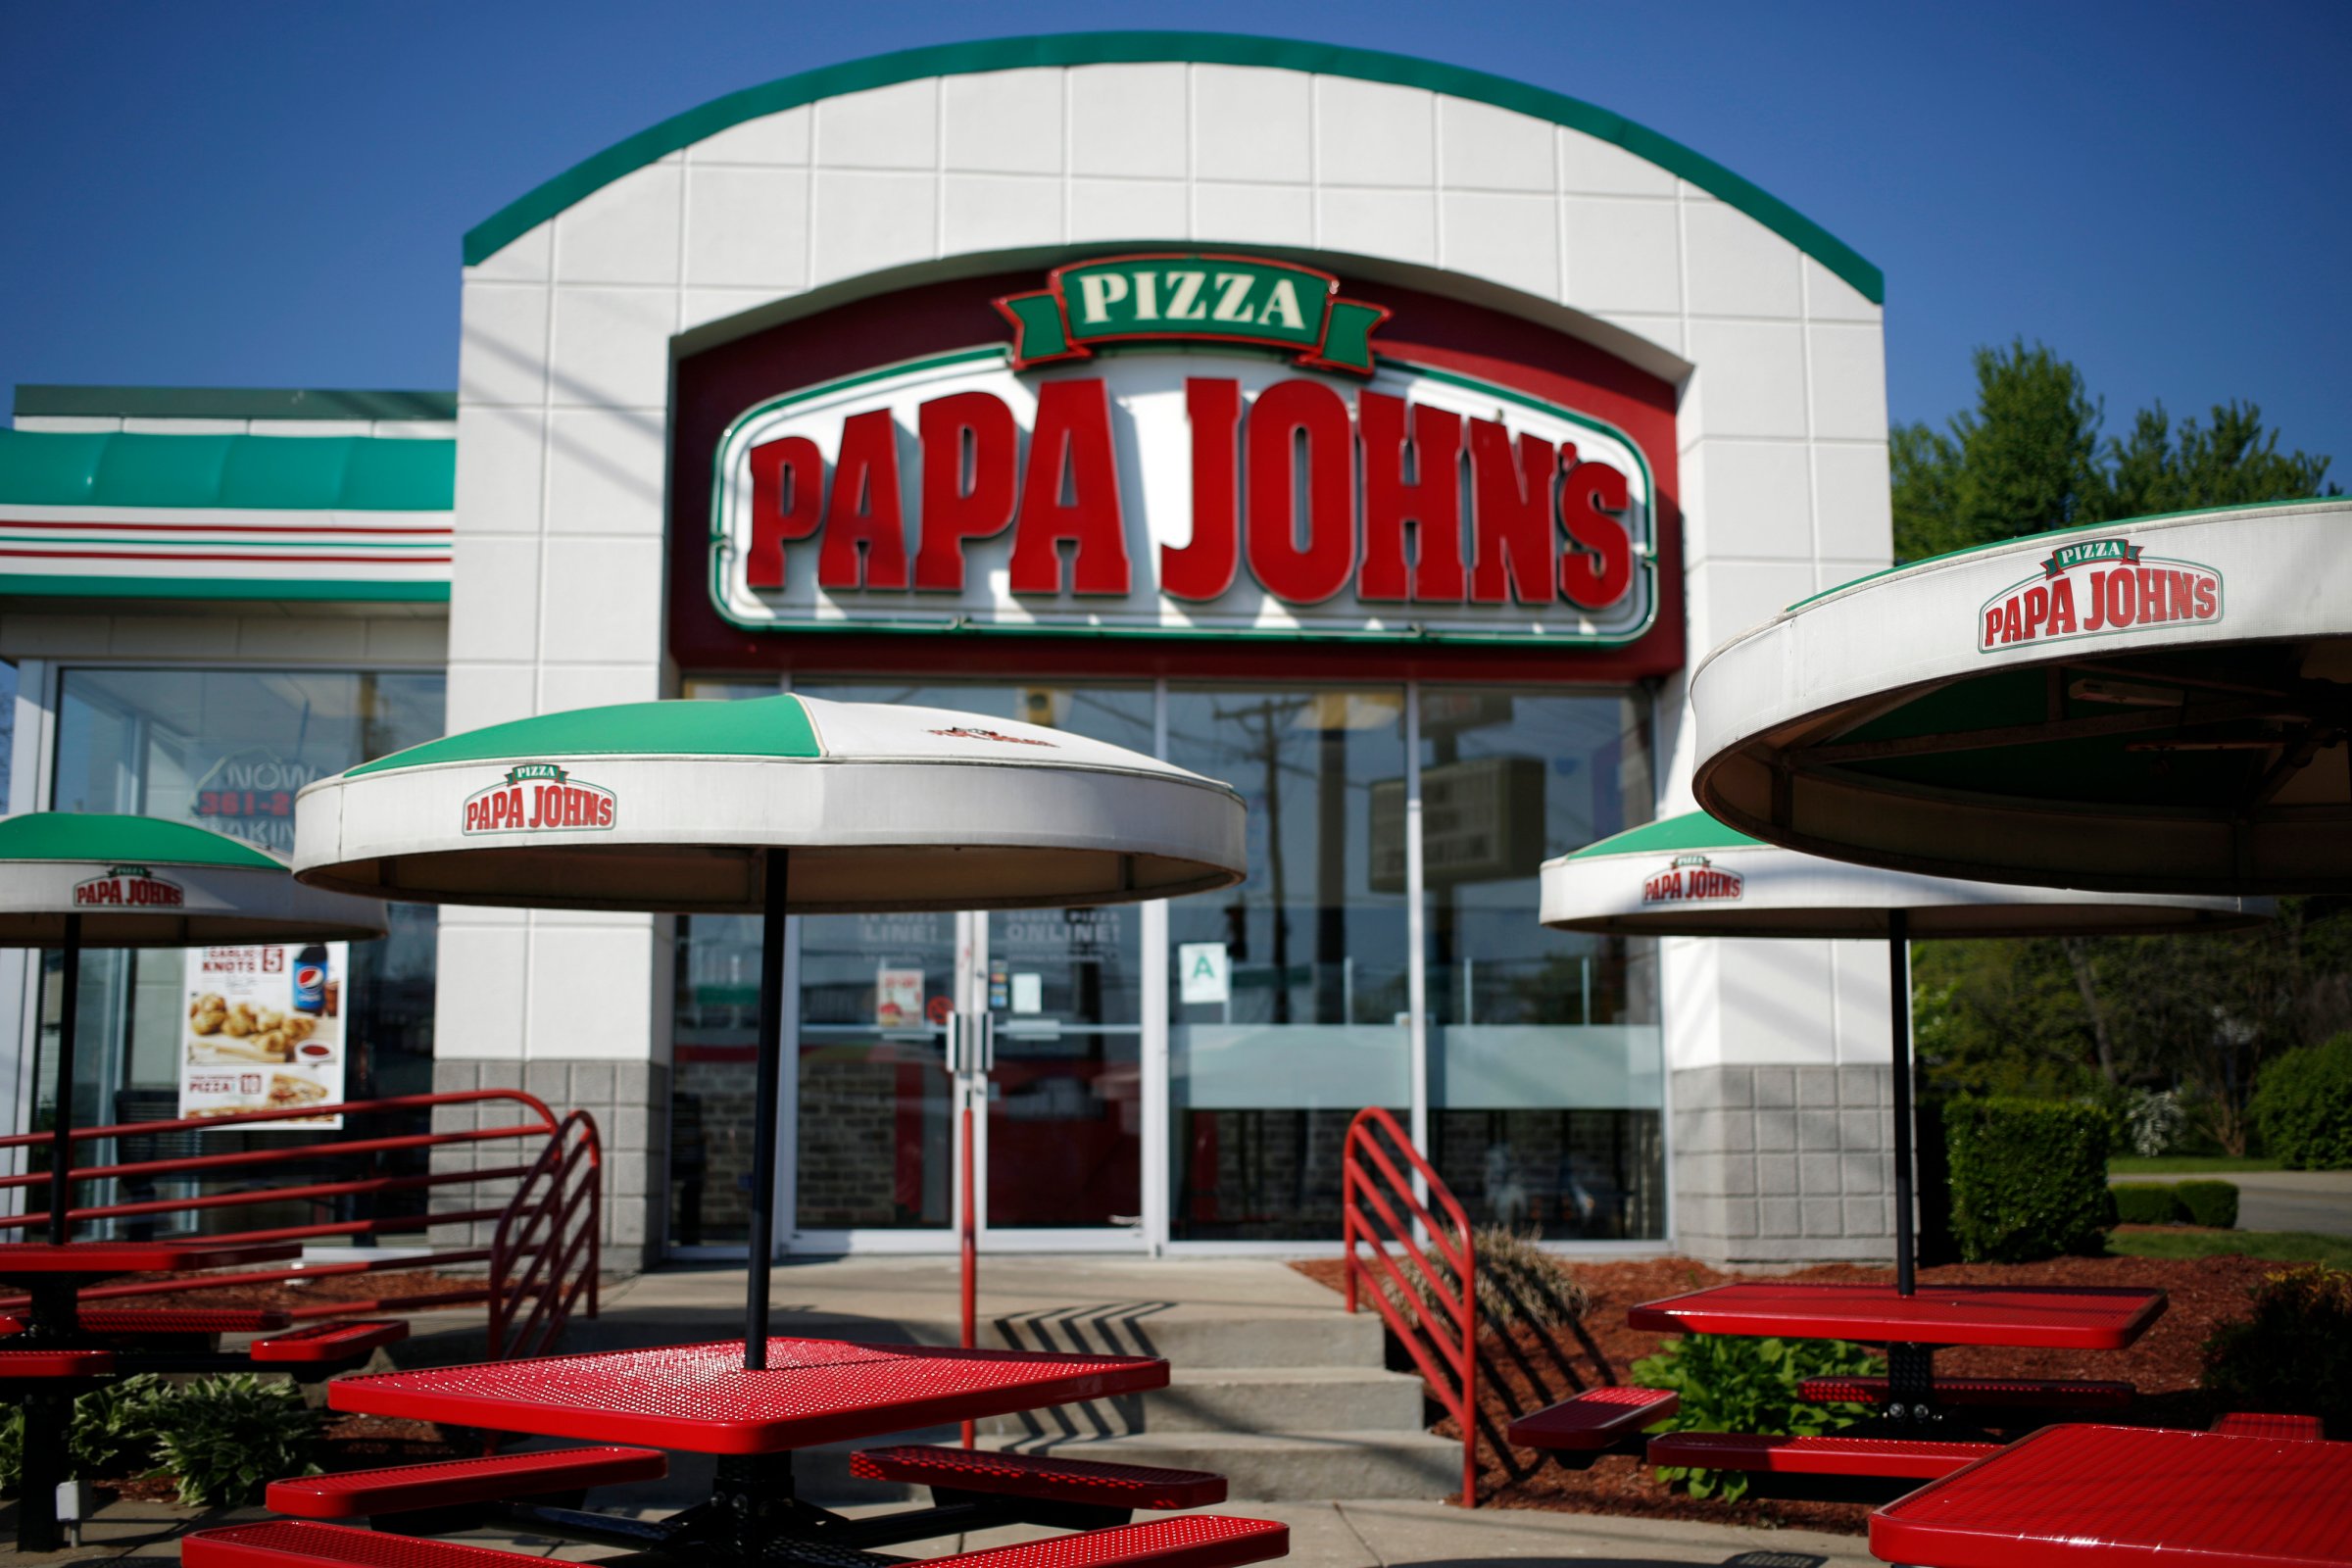 Umbrellas and outdoor seating stand outside a Papa John's International Inc. restaurant in Louisville, Kentucky, U.S., on Friday, May 1, 2015.